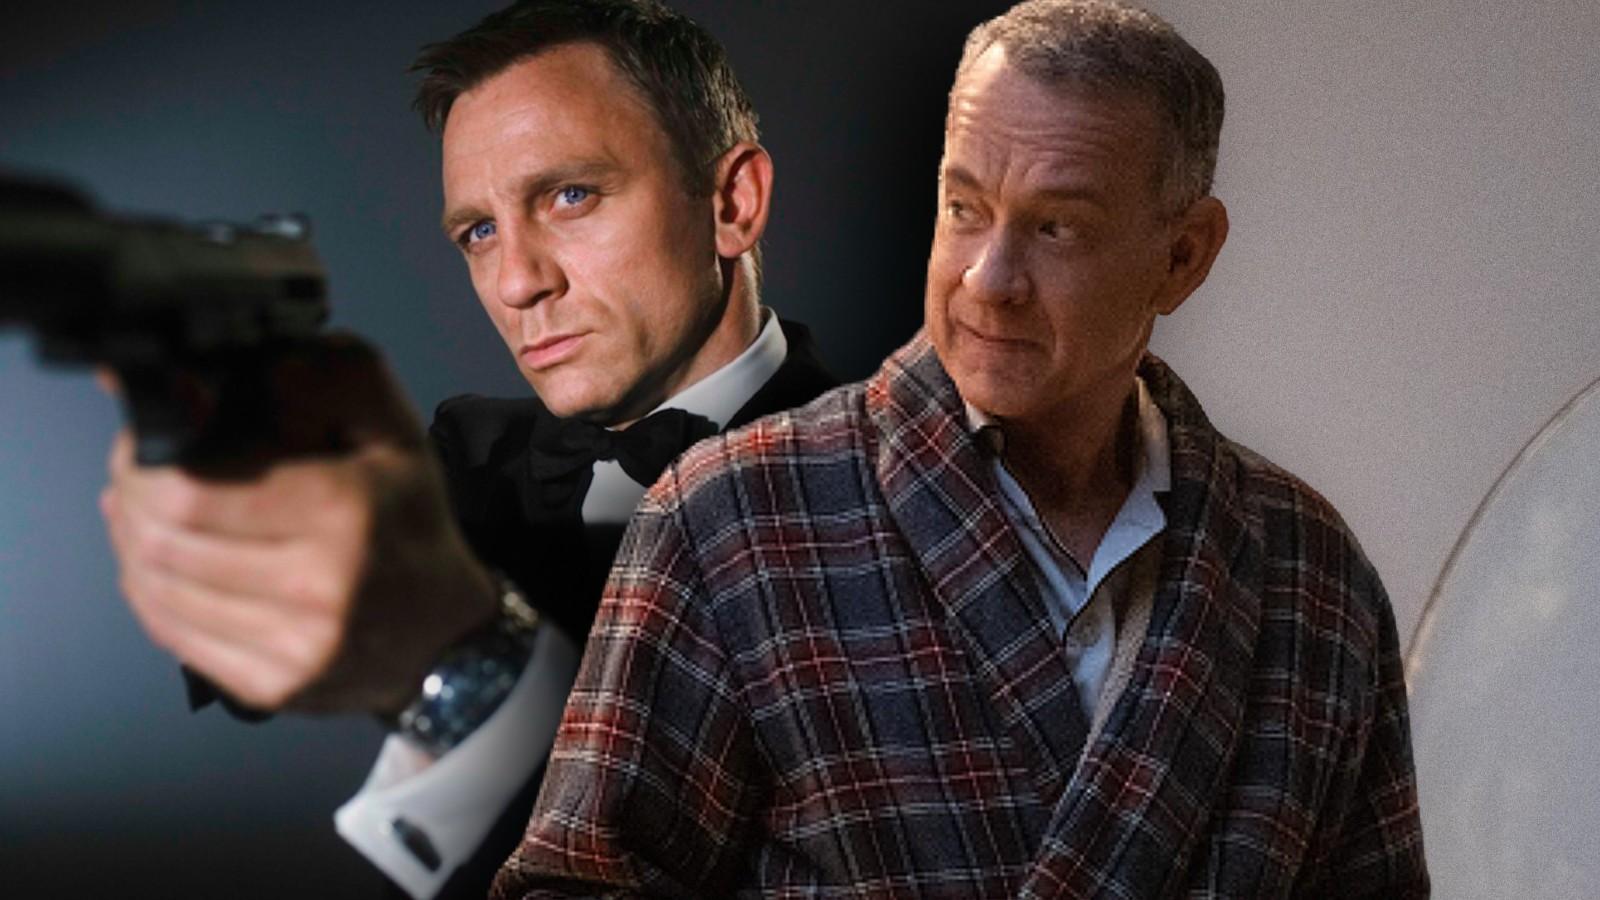 Daniel Craig as James Bond and Tom Hanks in A Man Called Otto